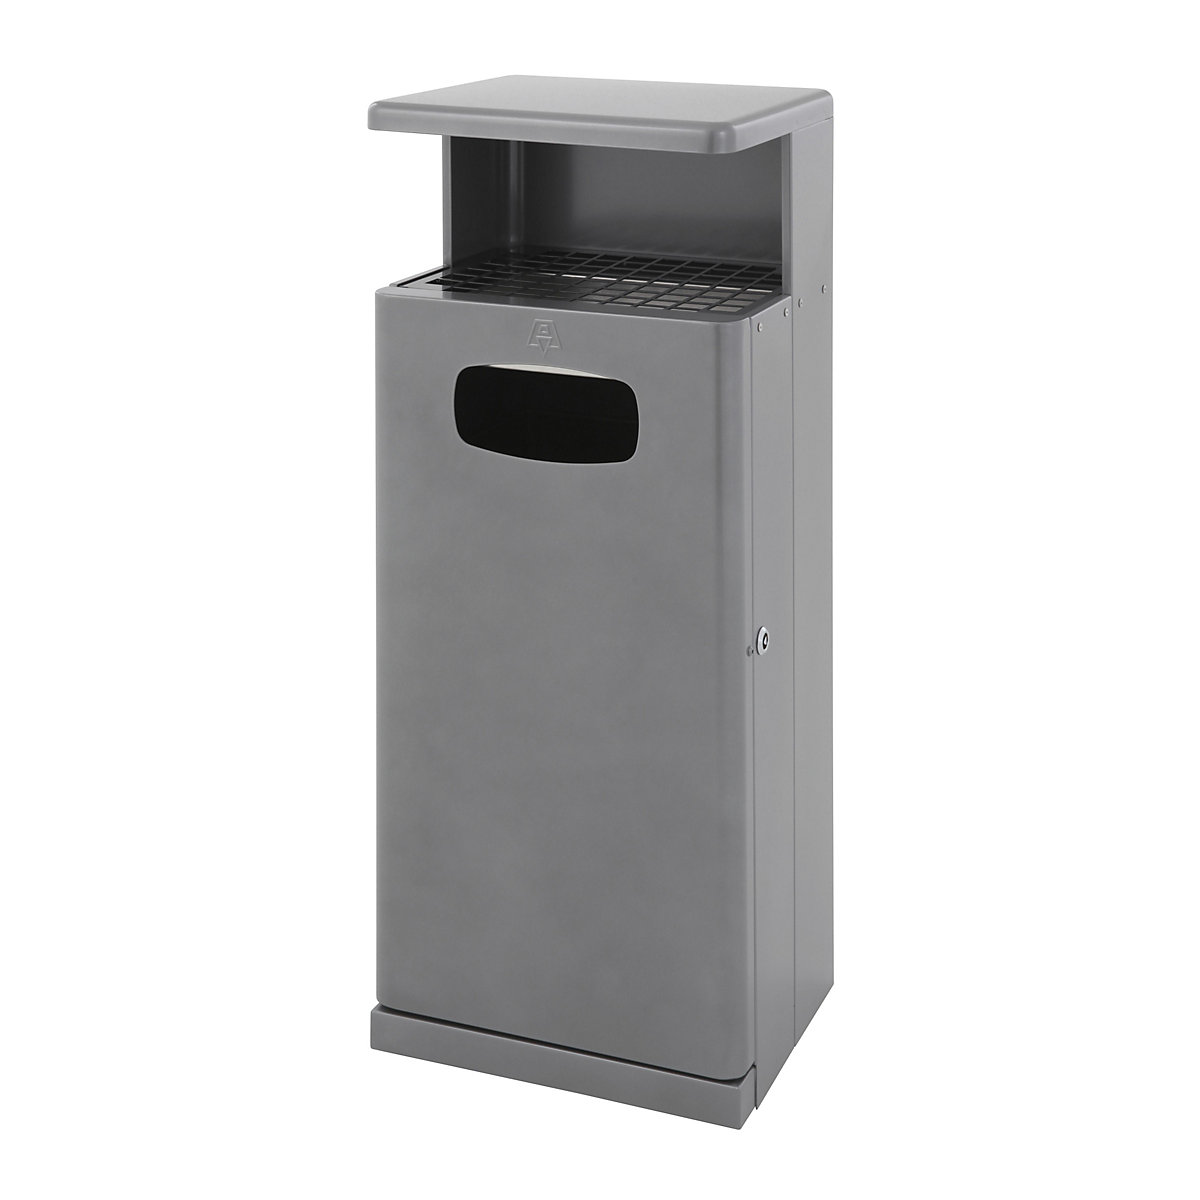 Waste collector with ashtray hood, aluminium